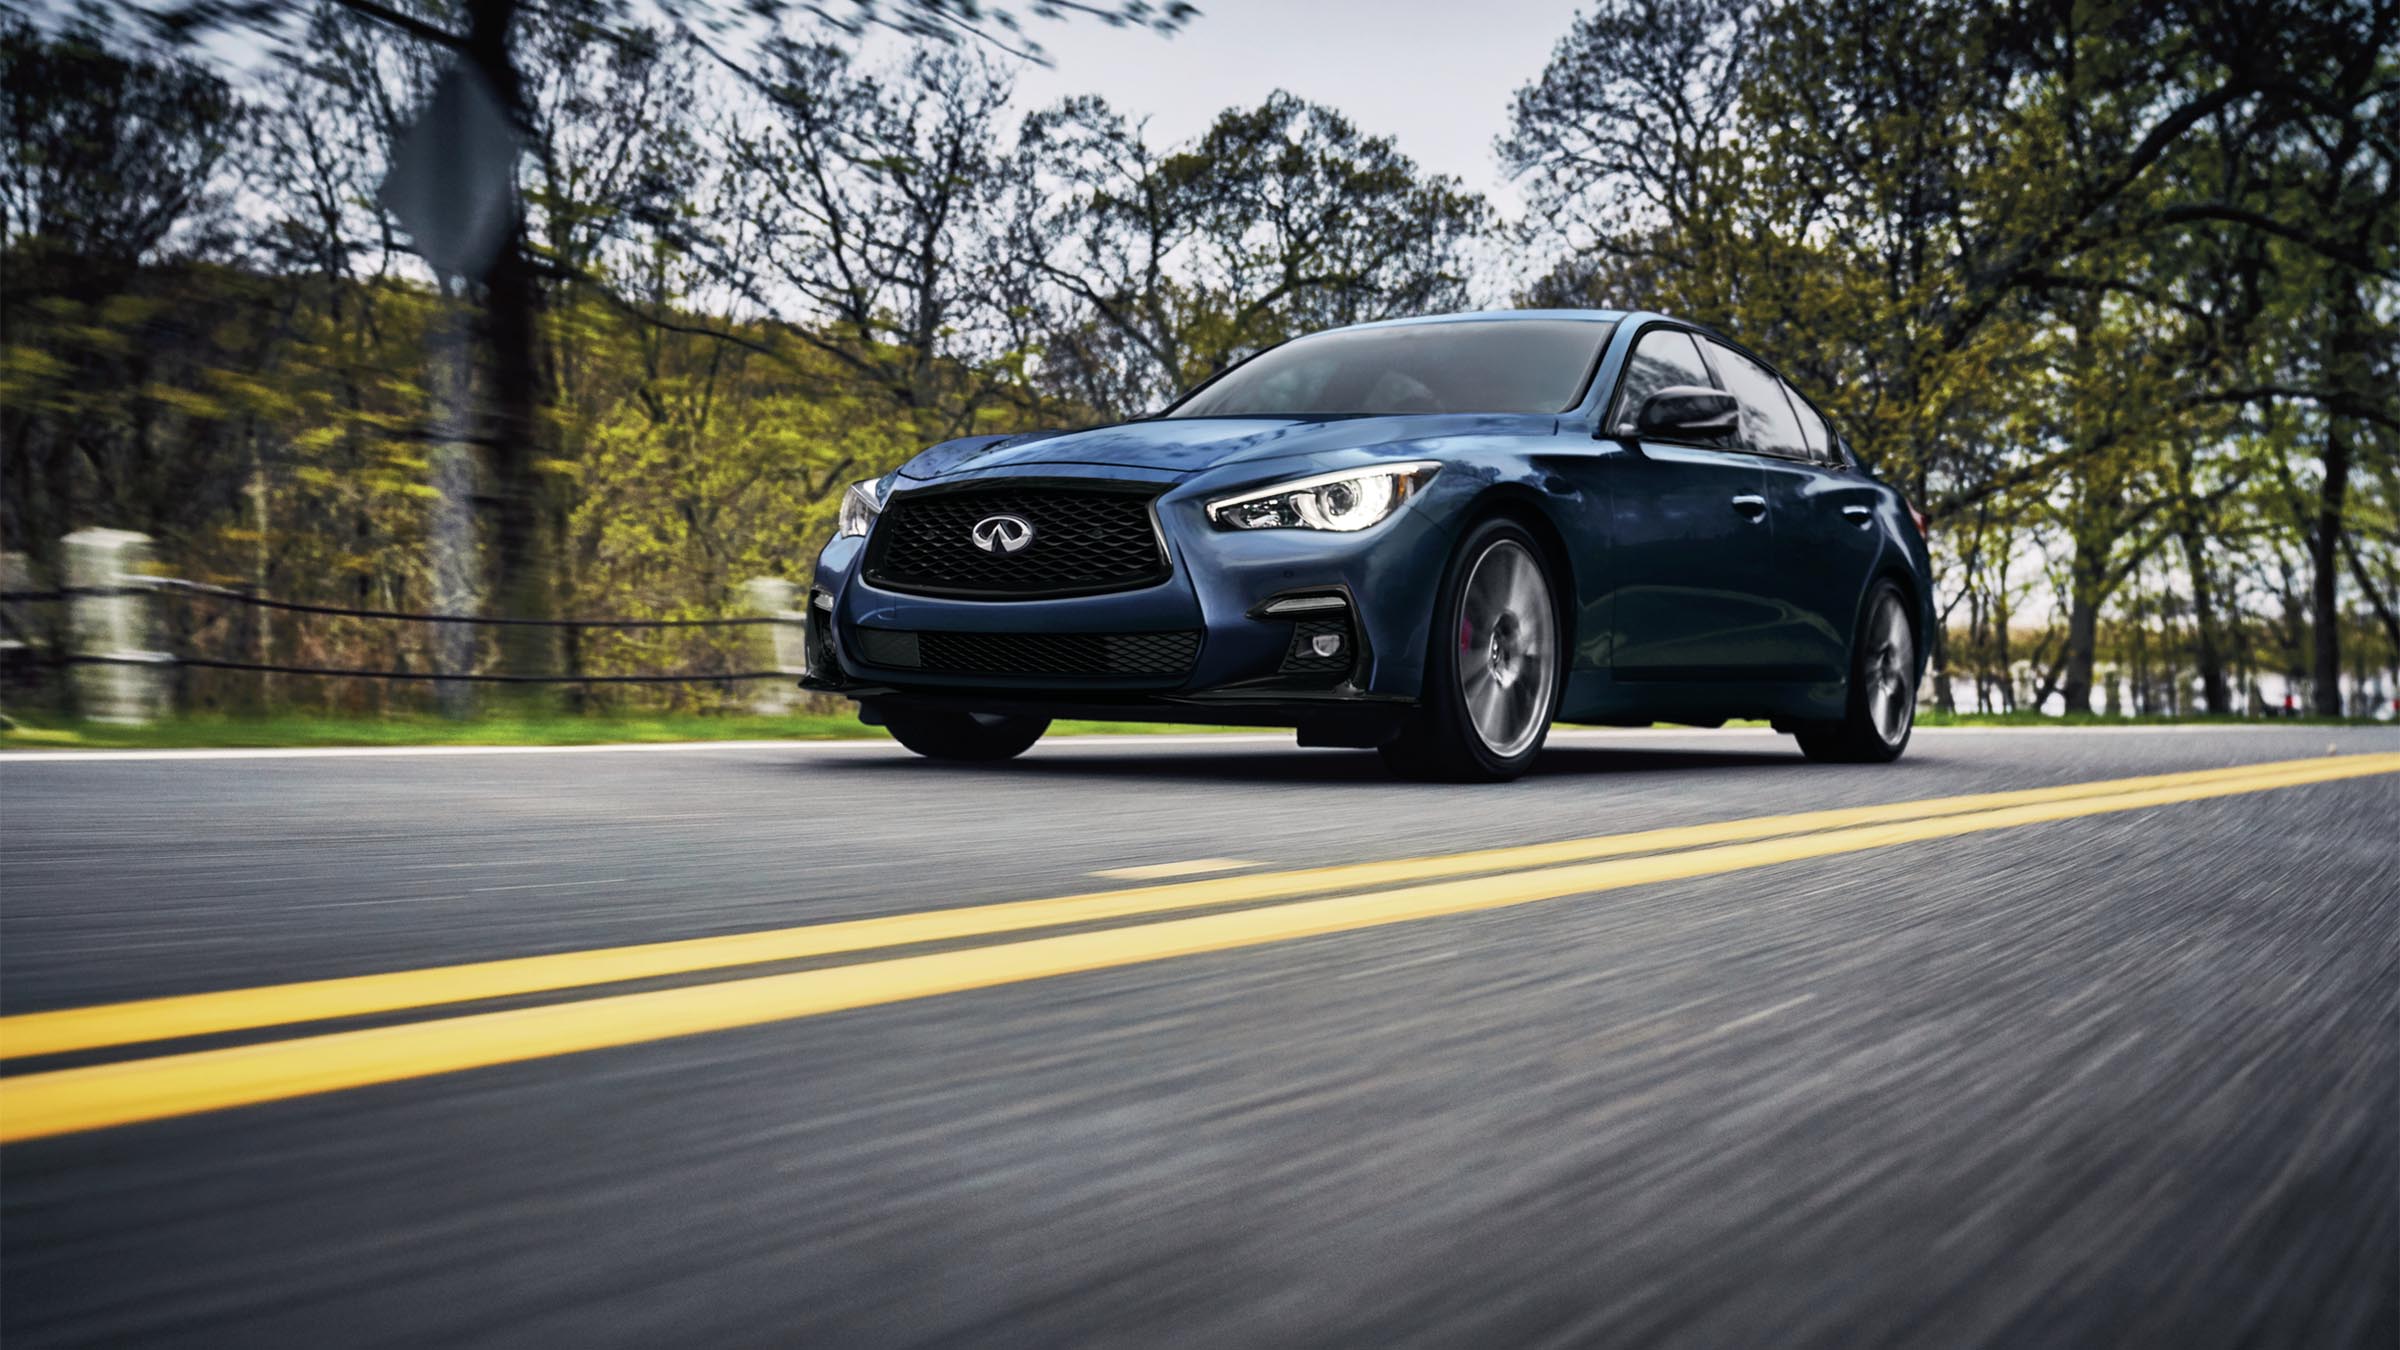 Exterior view of a blue 2022 INFINITI Q50 sedan on the road.